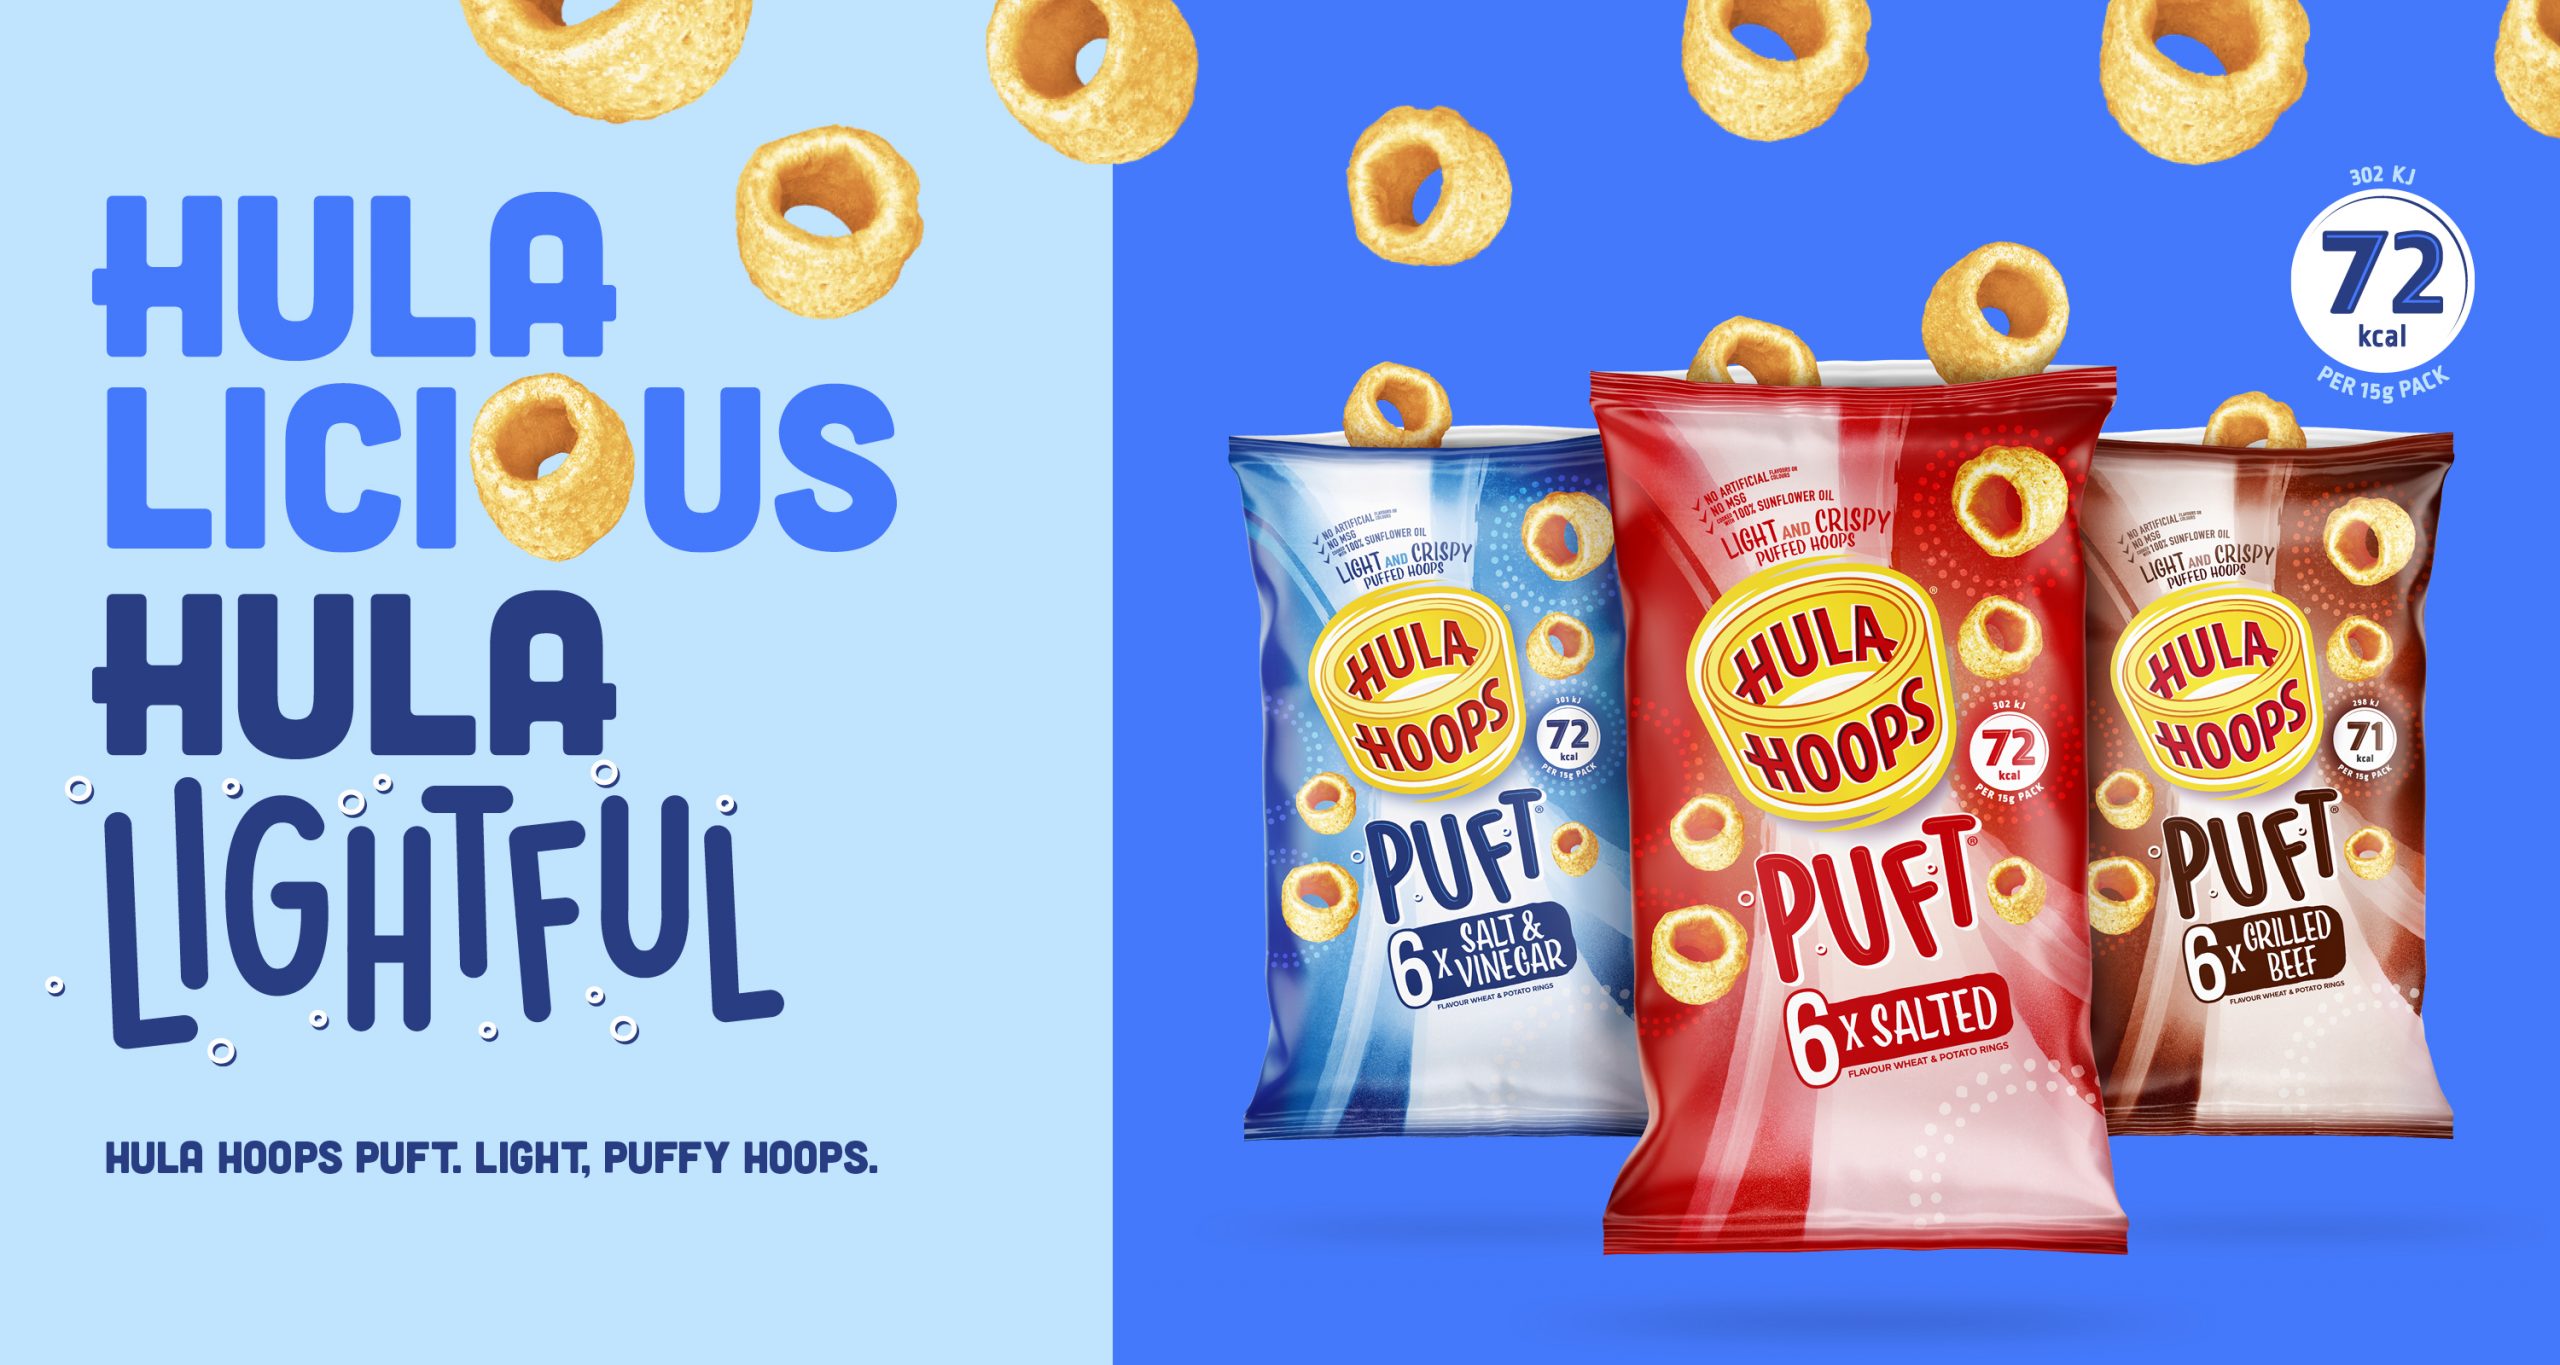 KP Snacks invests £1m in “Hula Licious, Hula Lightful” campaign for Hula Hoops Puft